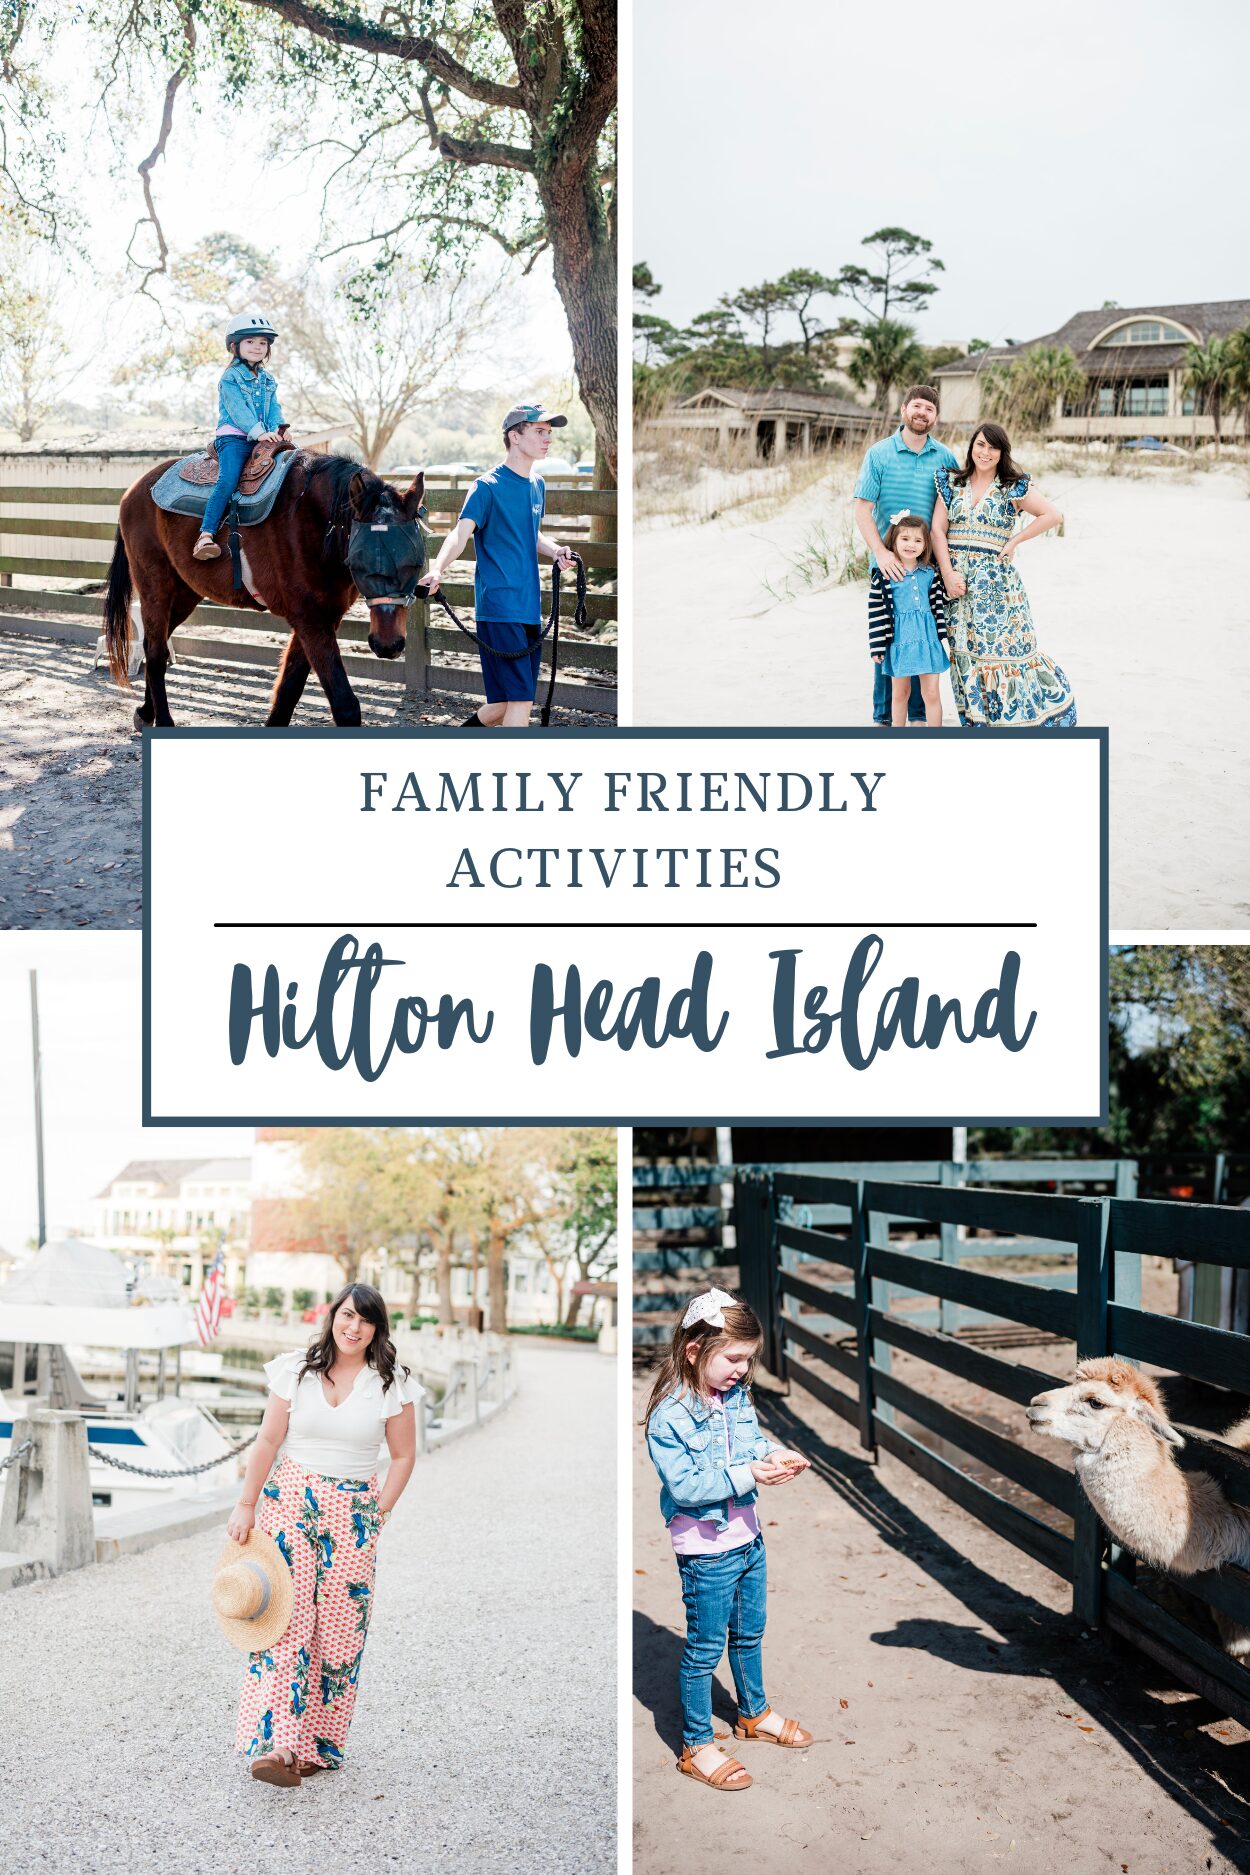 Things to do in Hilton Head Island for Families